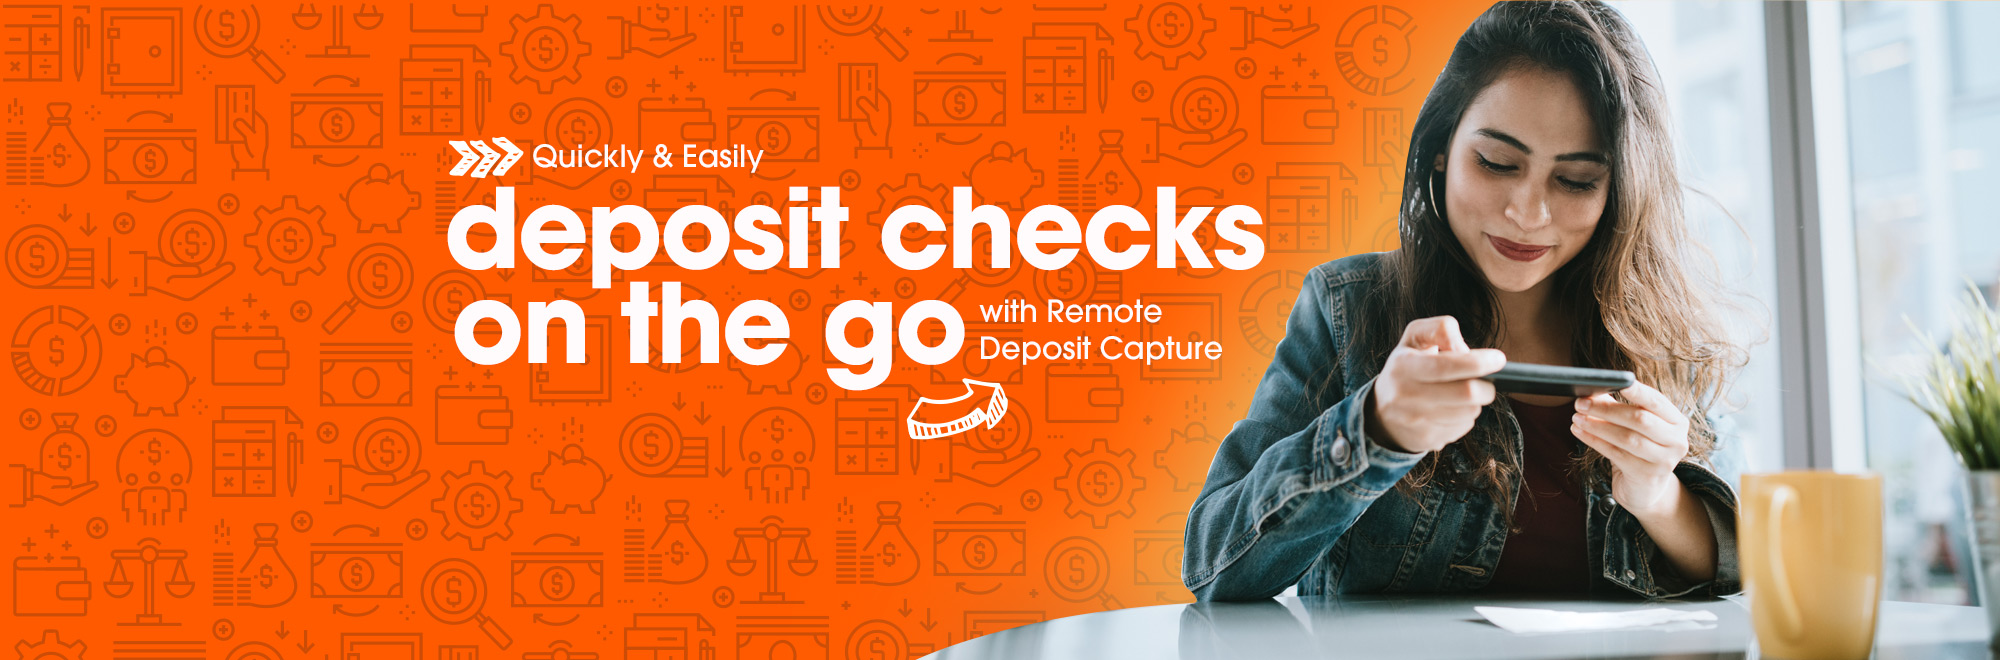 Quickly and easily deposit checks on the go with remote deposit capture